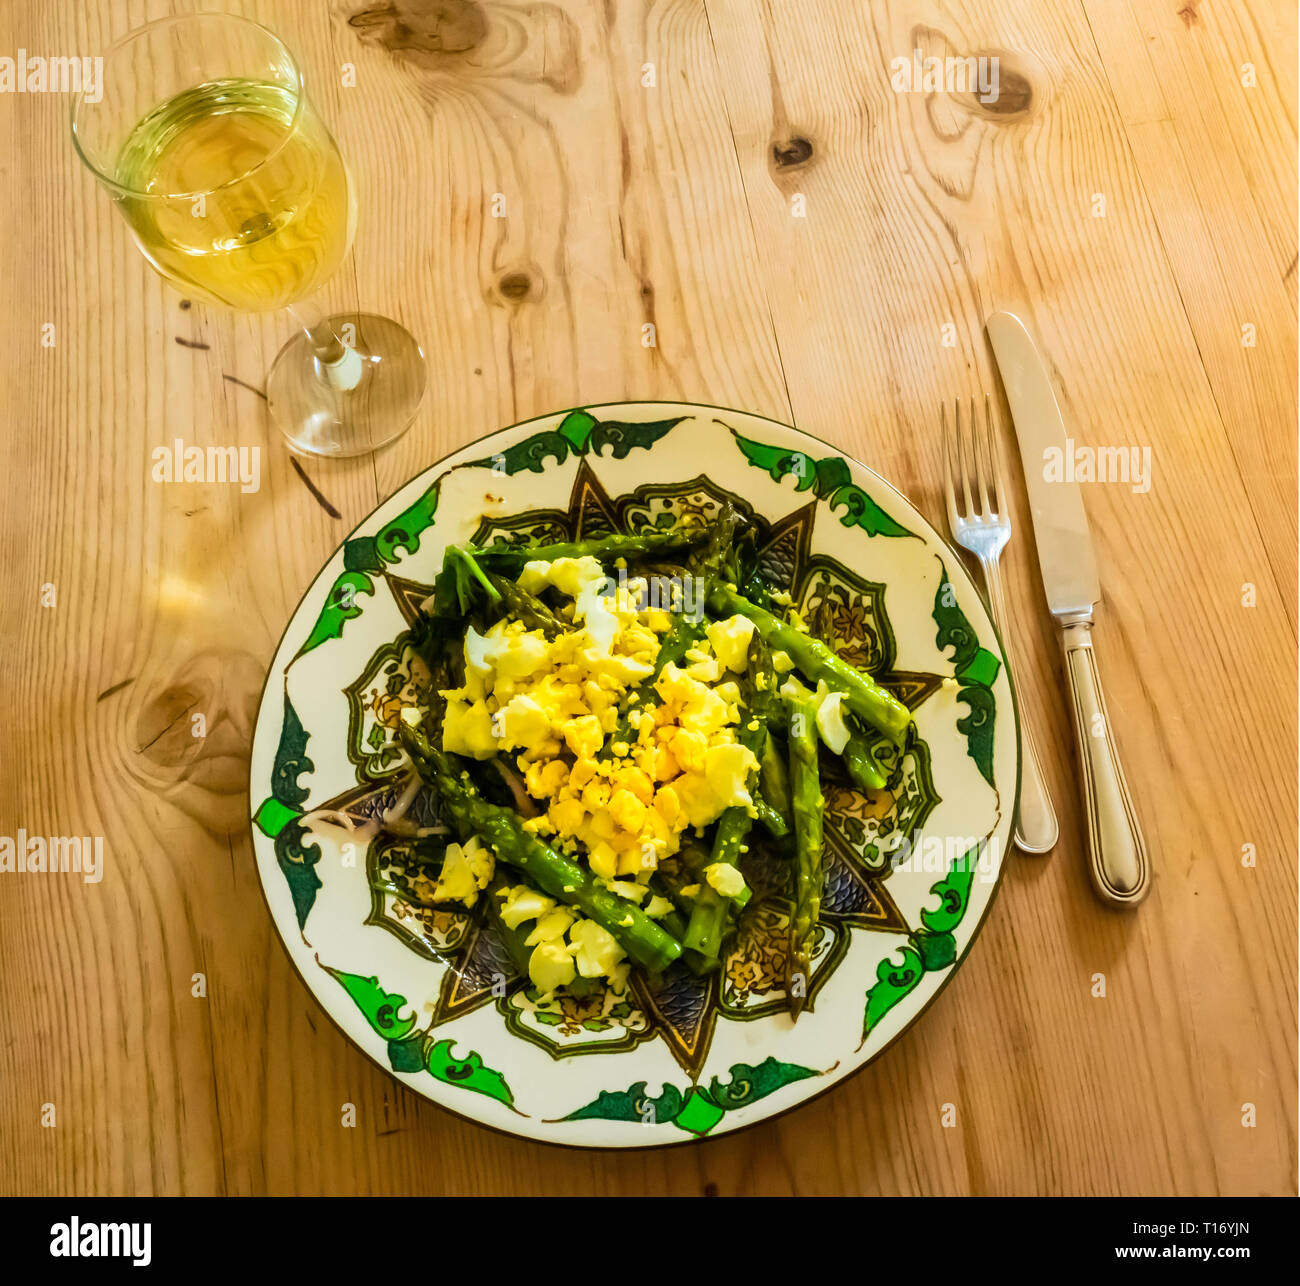 A light lunch of Asparagus Mimosa made with chopped hard-boiled egg and shallots served on a fancy plate on a wooden table Stock Photo